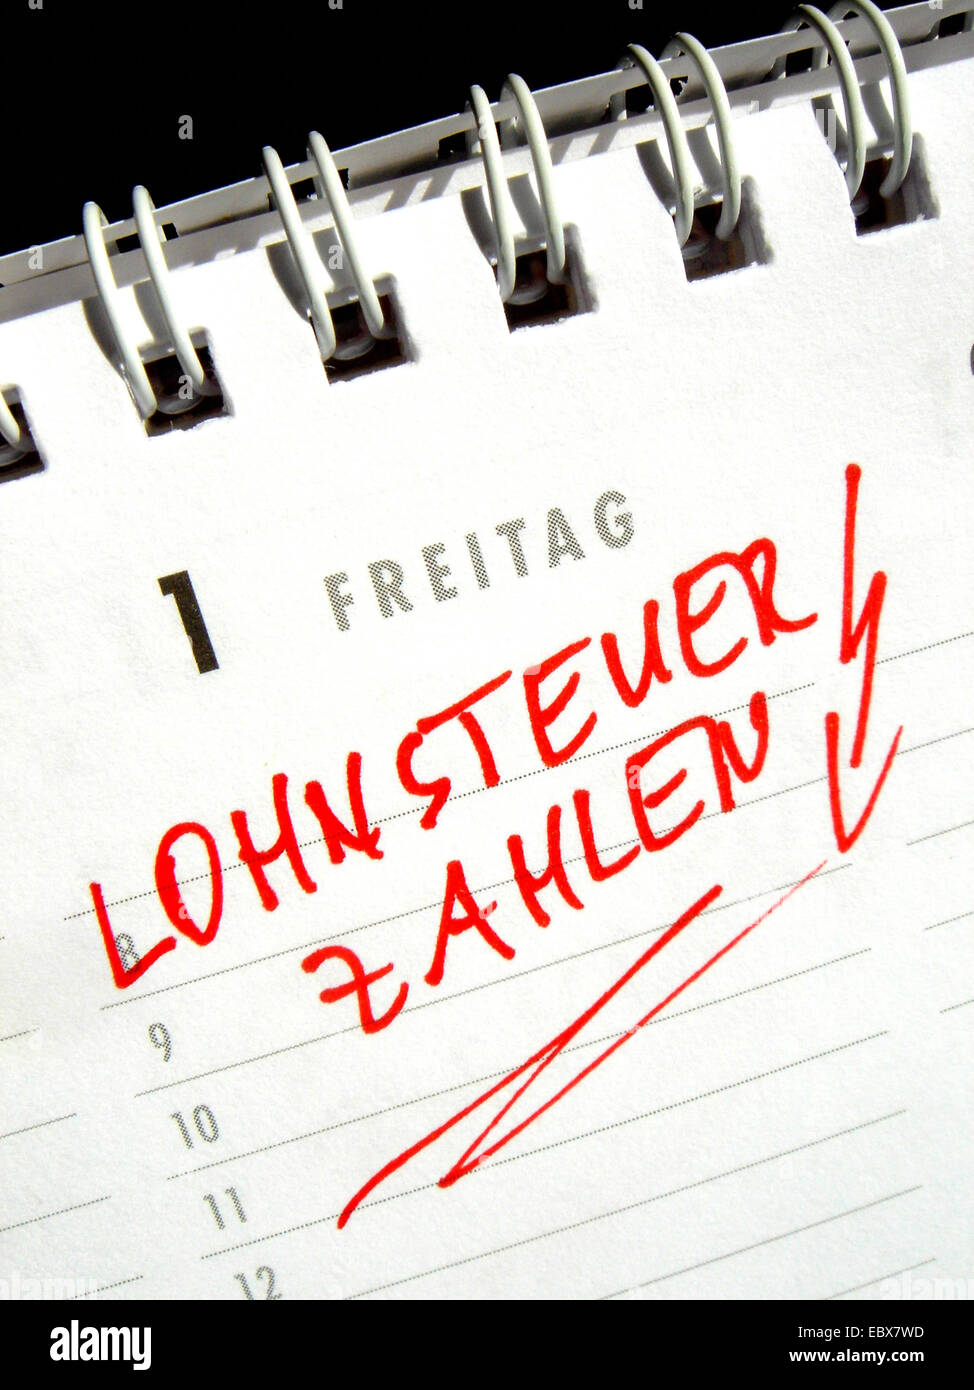 pay wage tax - calendar entry Stock Photo